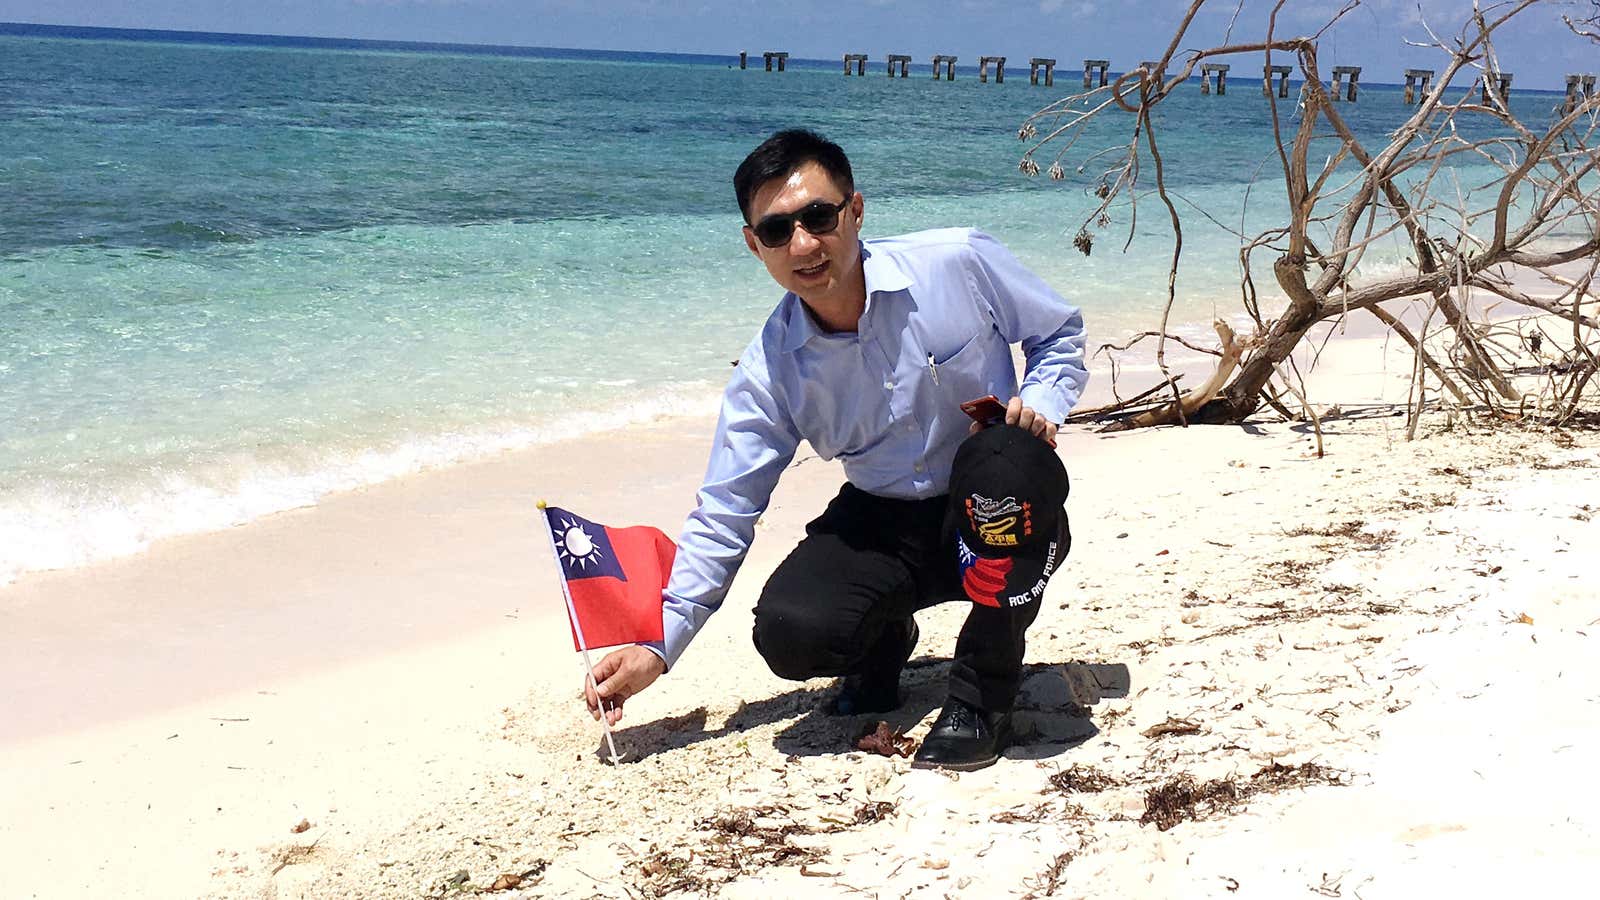 Taiwanese lawmaker Chiang Chi-chen plants the national flag on Taiping Island on July 20, 2016.